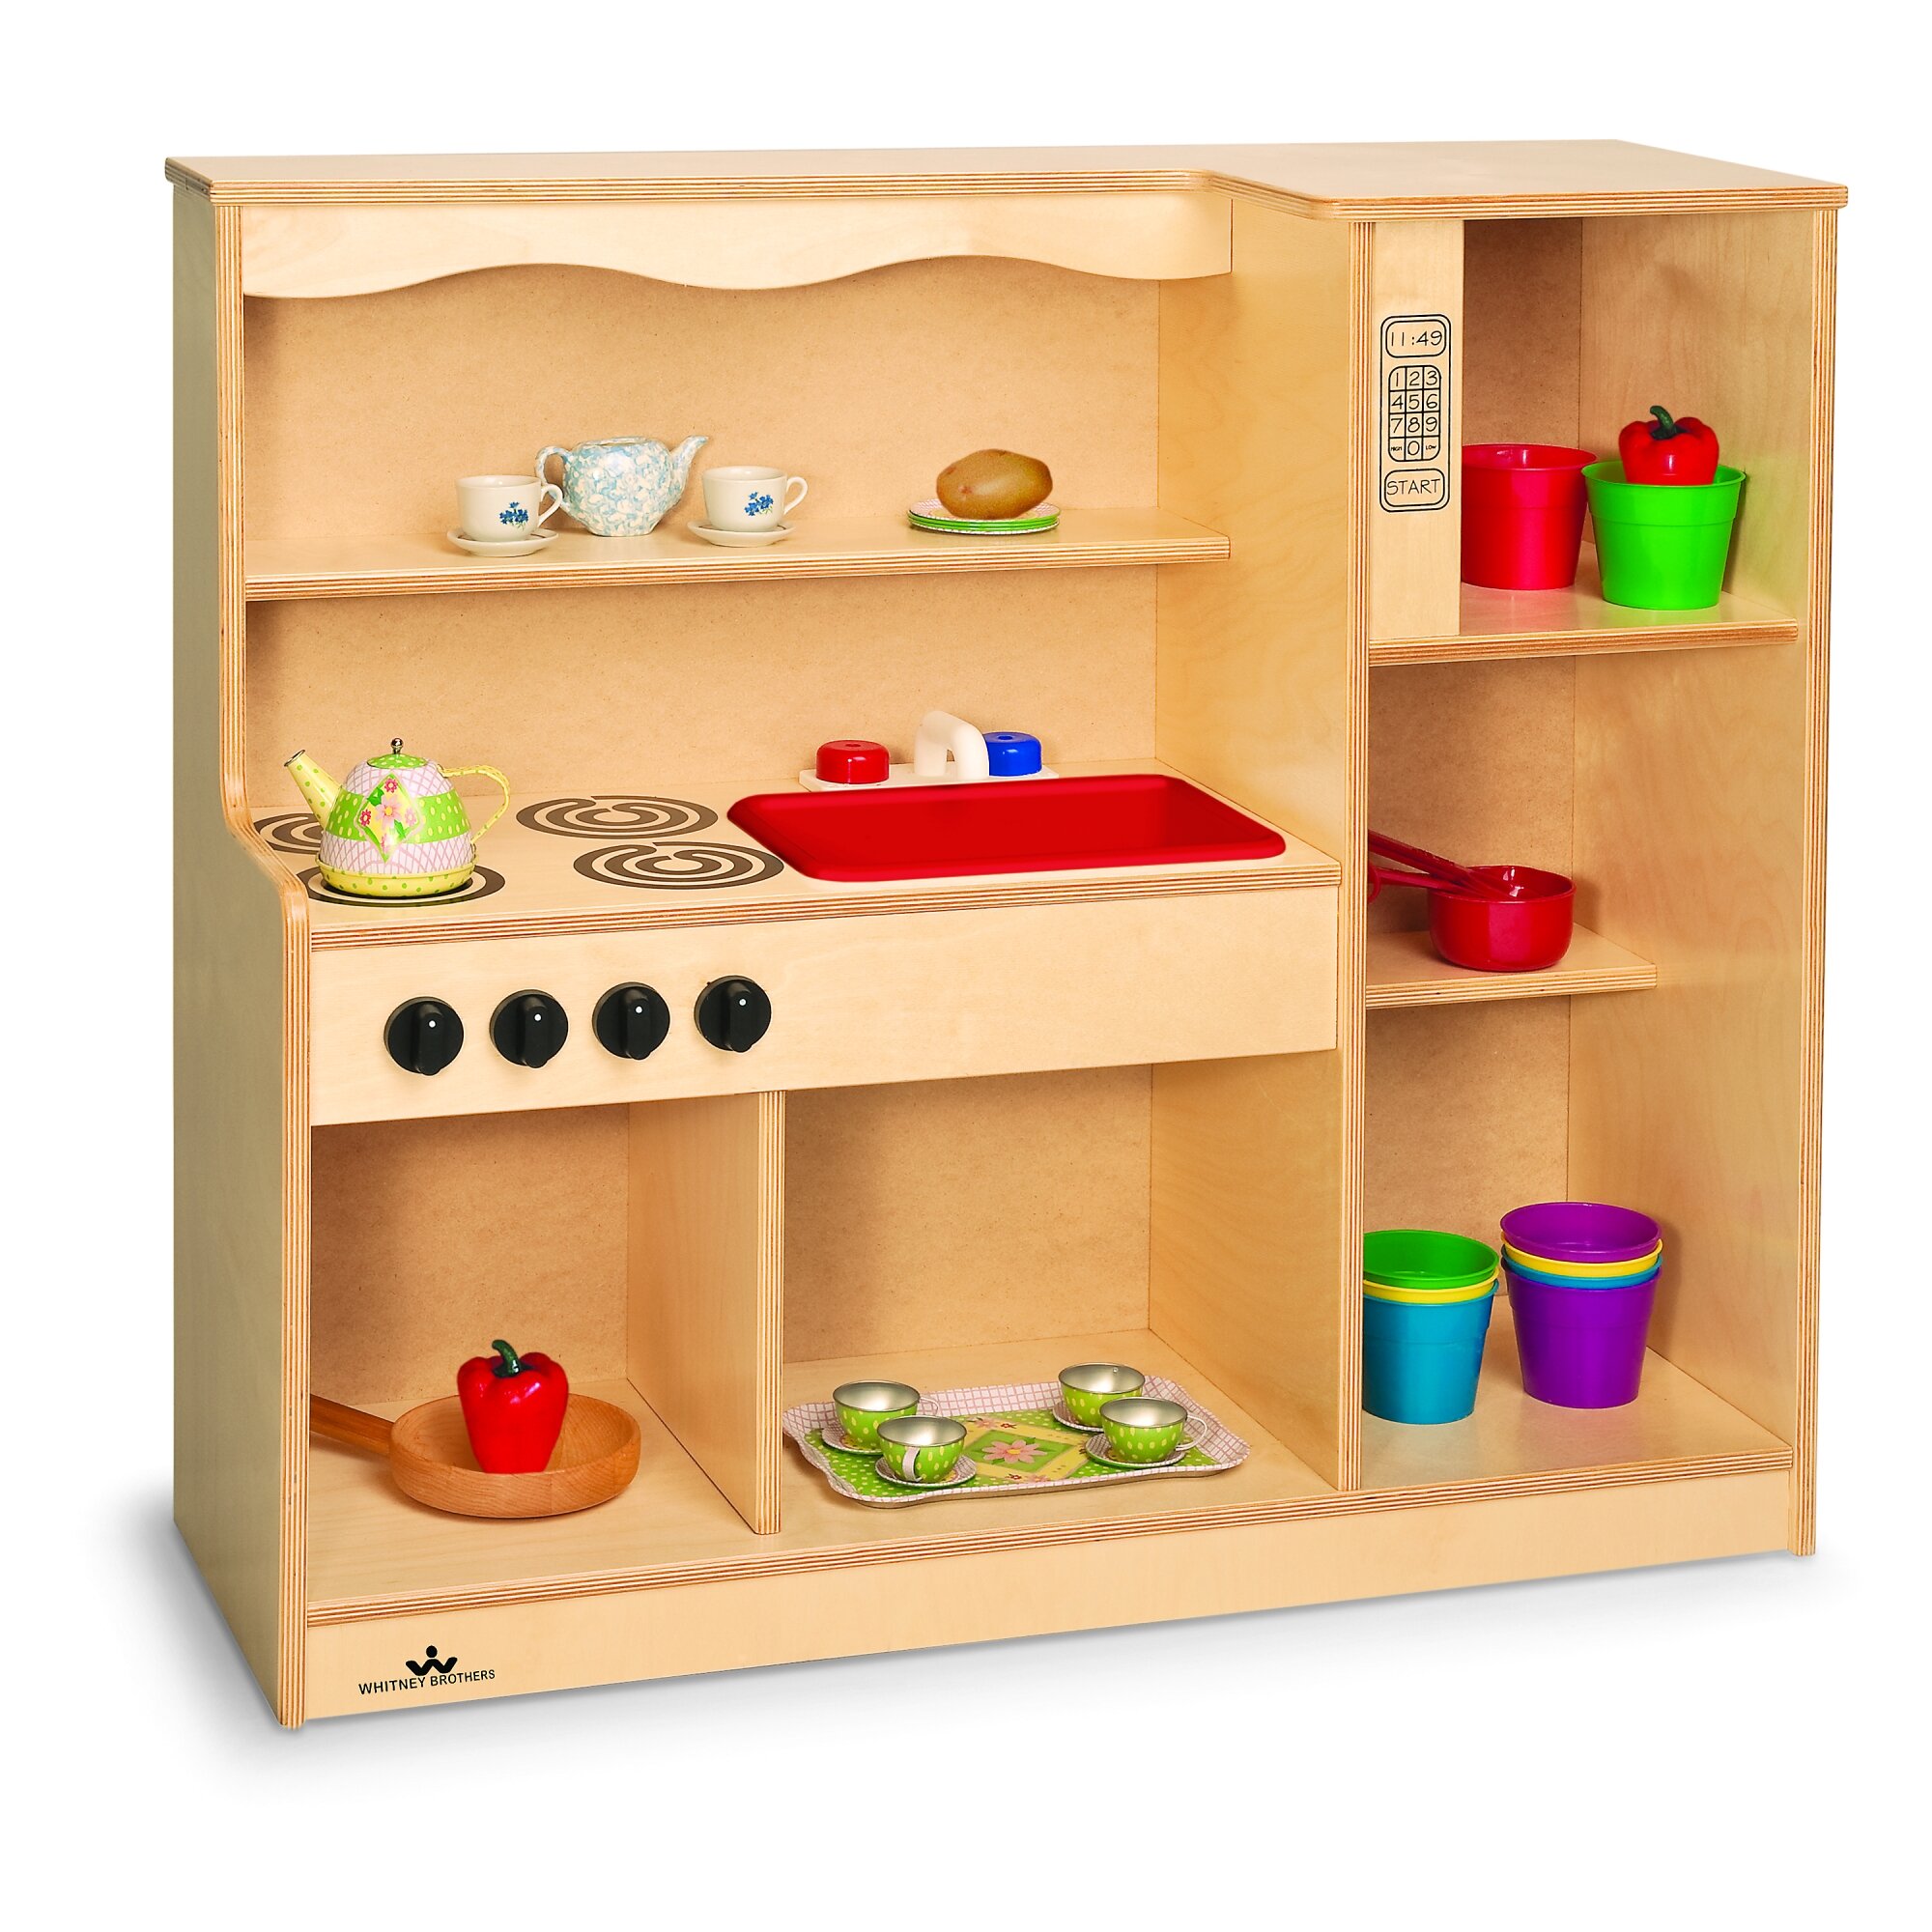 kitchen set for toddlers